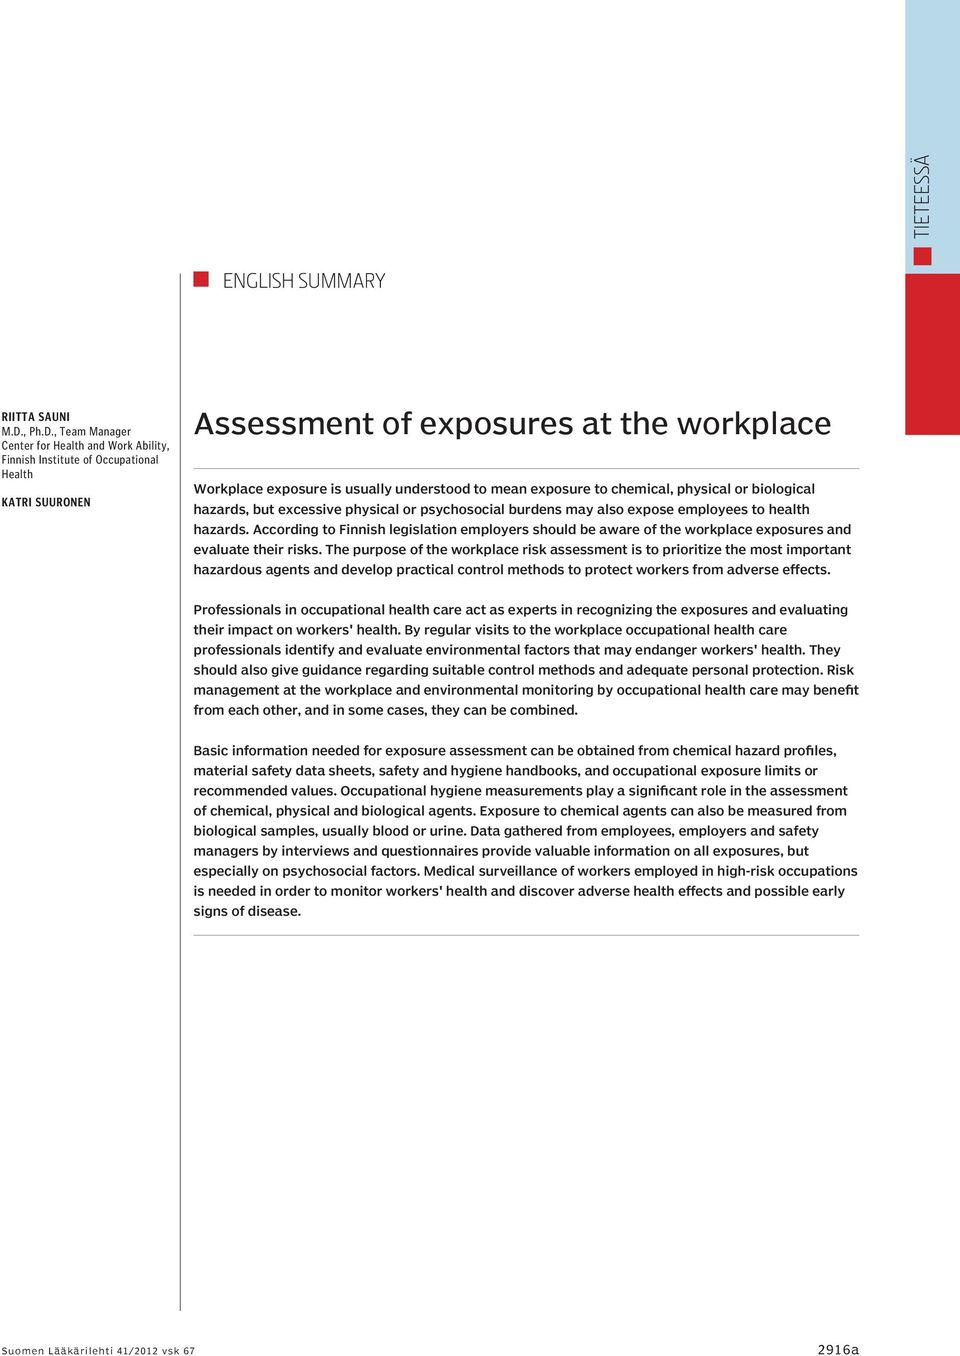 , Team Manager Center for Health and Work Ability, Finnish Institute of Occupational Health Katri Suuronen Assessment of exposures at the workplace Workplace exposure is usually understood to mean